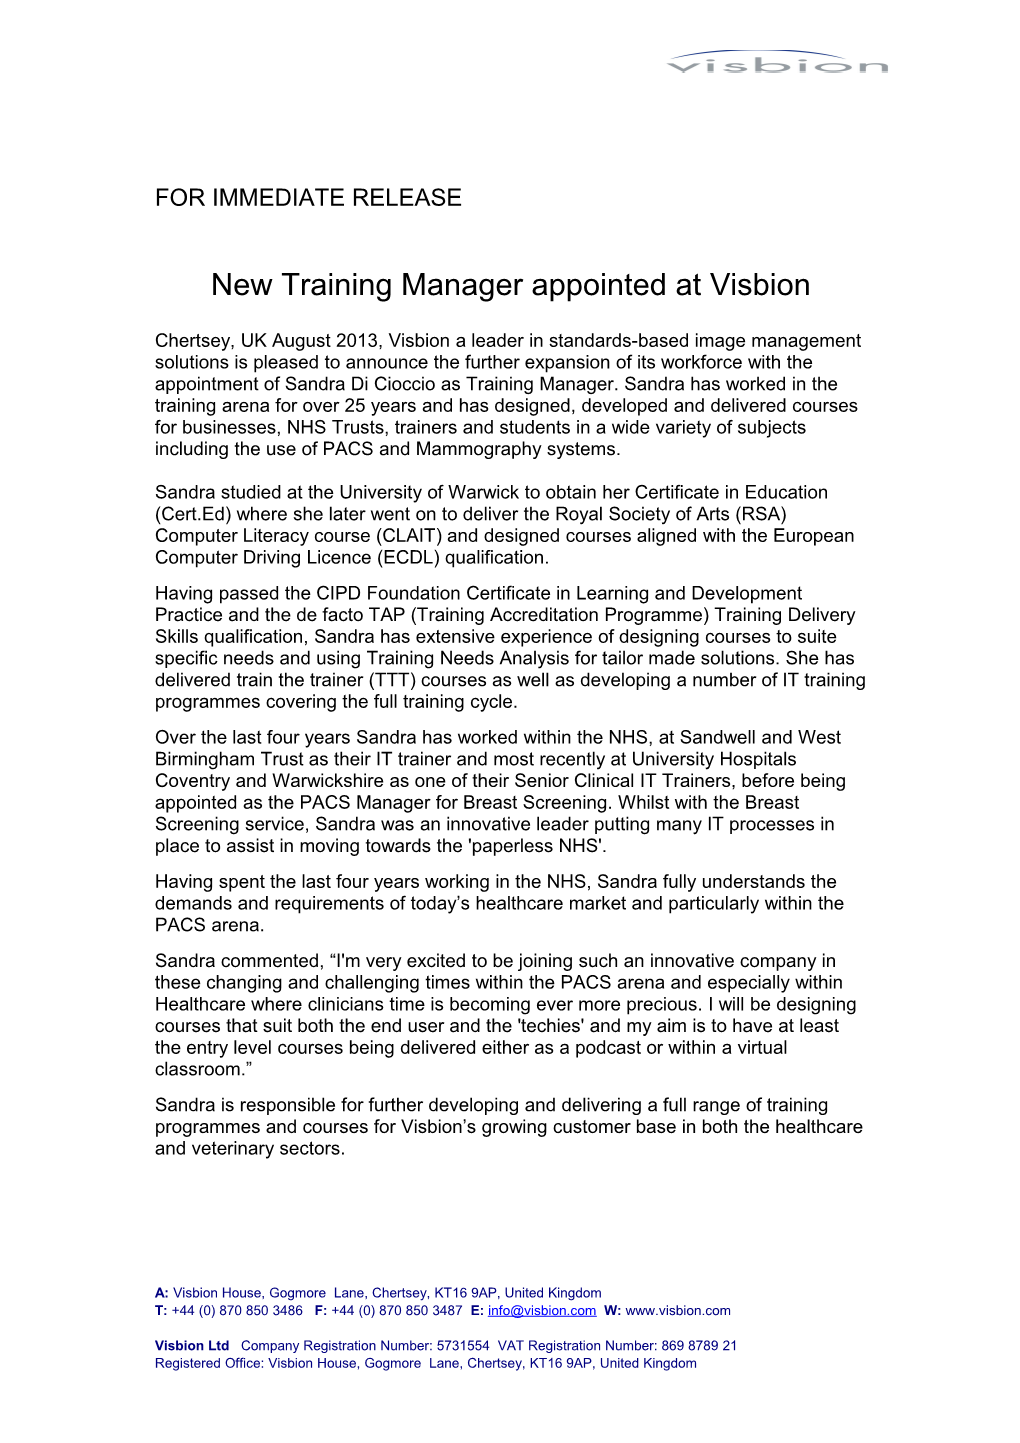 New Training Manager Appointed at Visbion